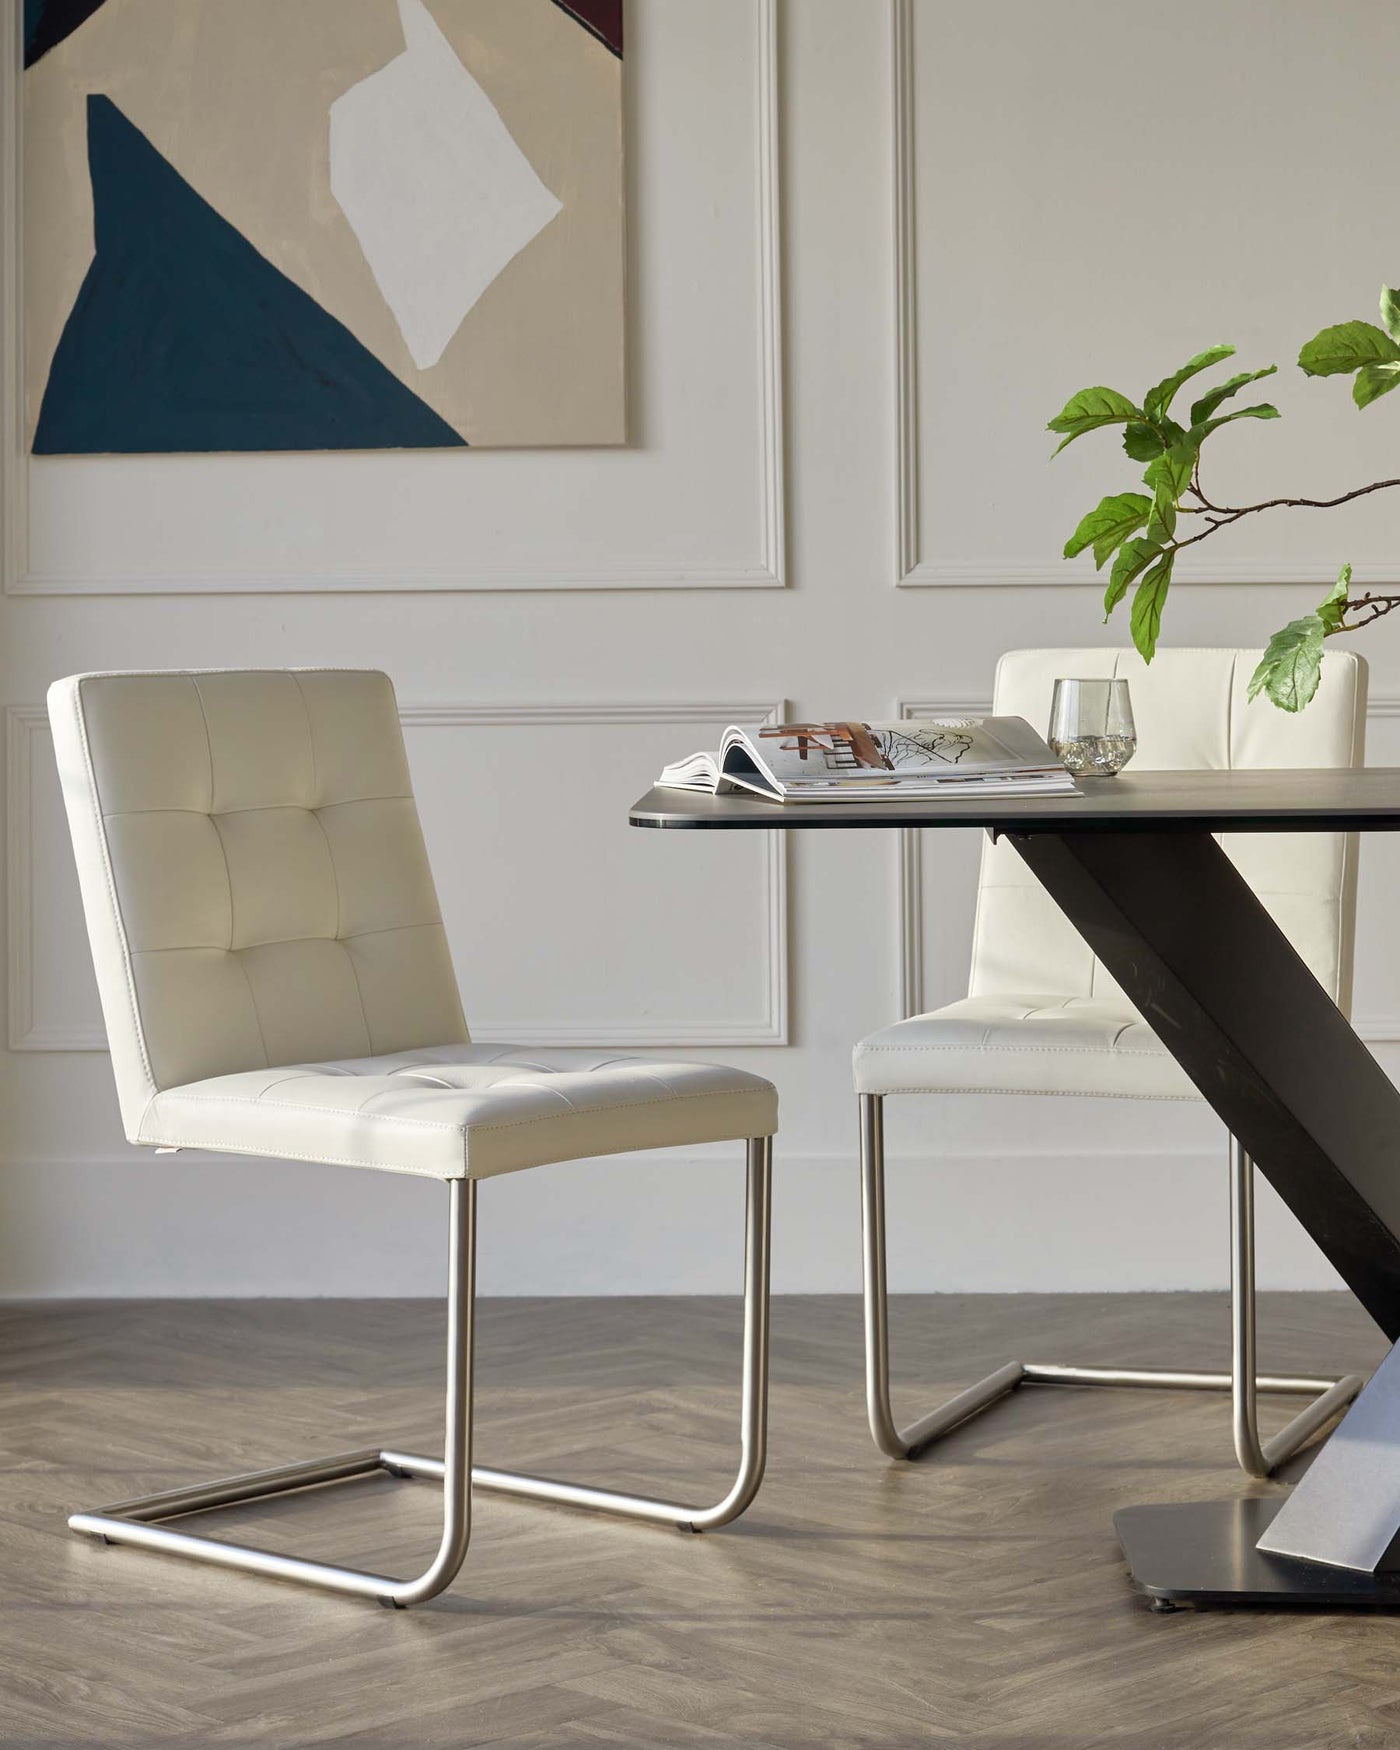 Modern minimalist dining set featuring a rectangular table with a black base and a glass top, accompanied by two white upholstered chairs with tufted backrests and sleek chrome cantilever bases. The setting is complemented by a contemporary painting and a small houseplant.